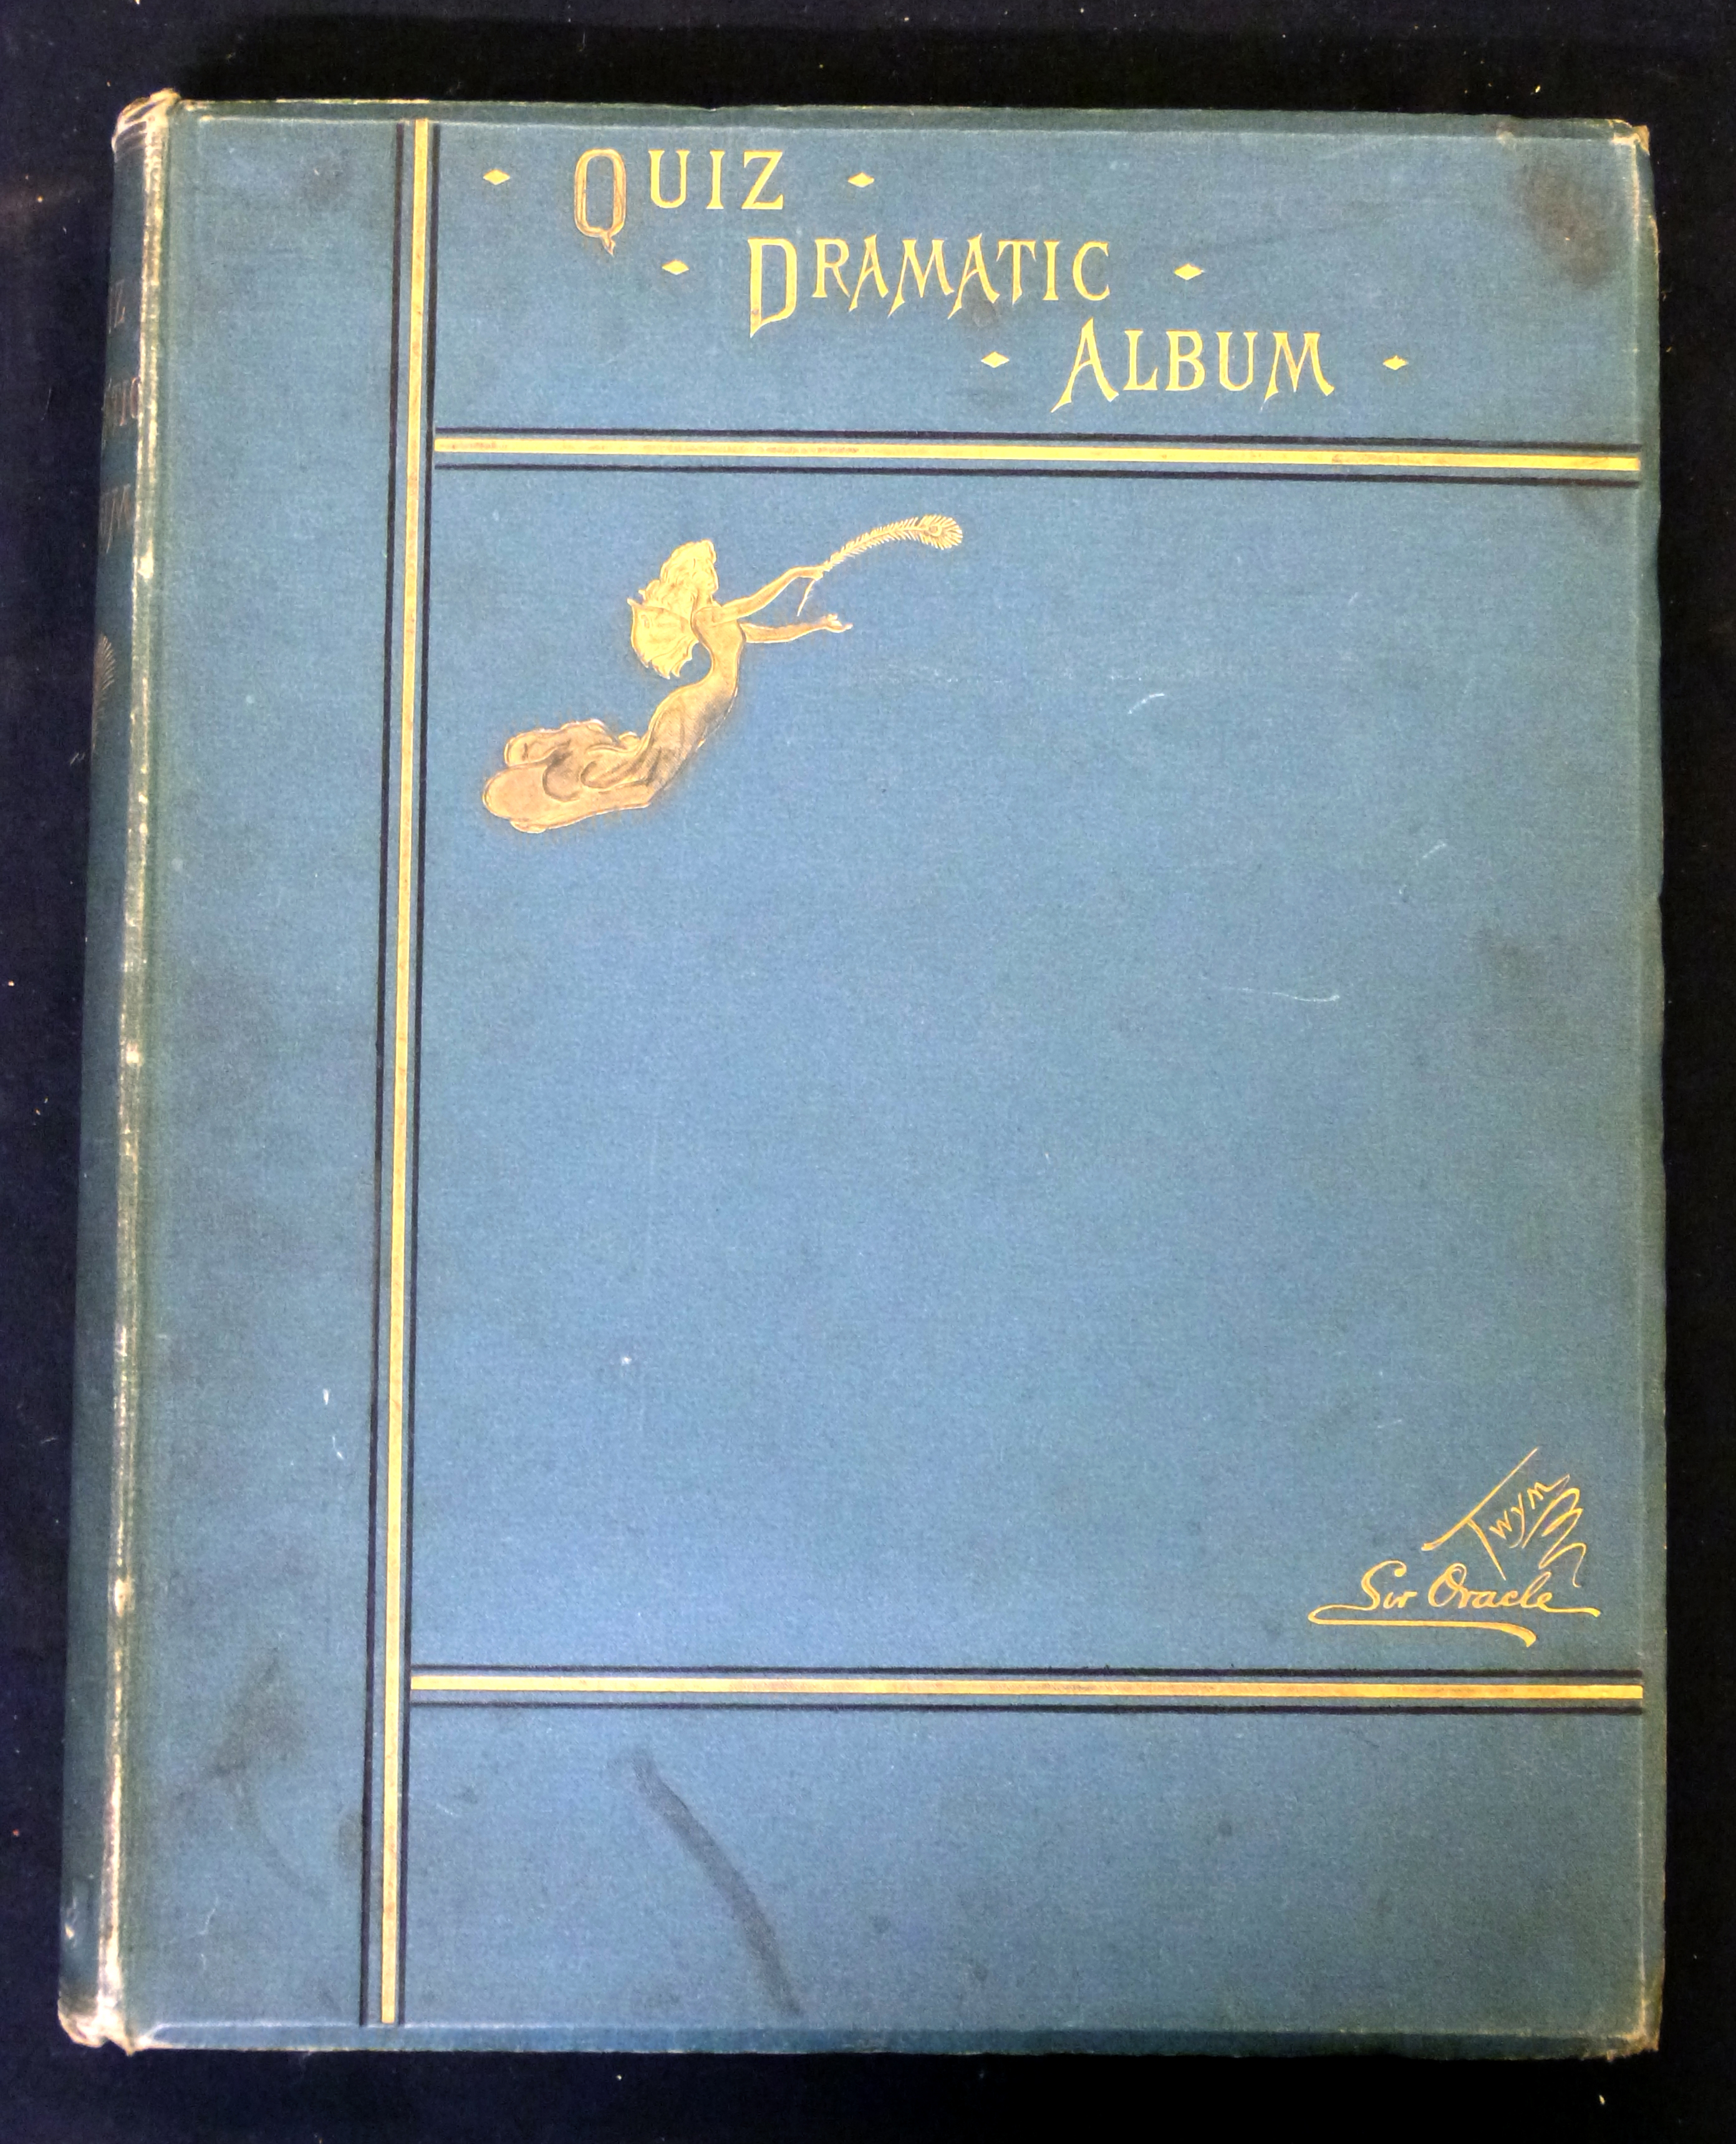 "TWYM" AND "SIR ORACLE": THE DRAMATIC ALBUM OF "QUIZ" FOR 1882, Glasgow, Quiz Office [1883], 1st